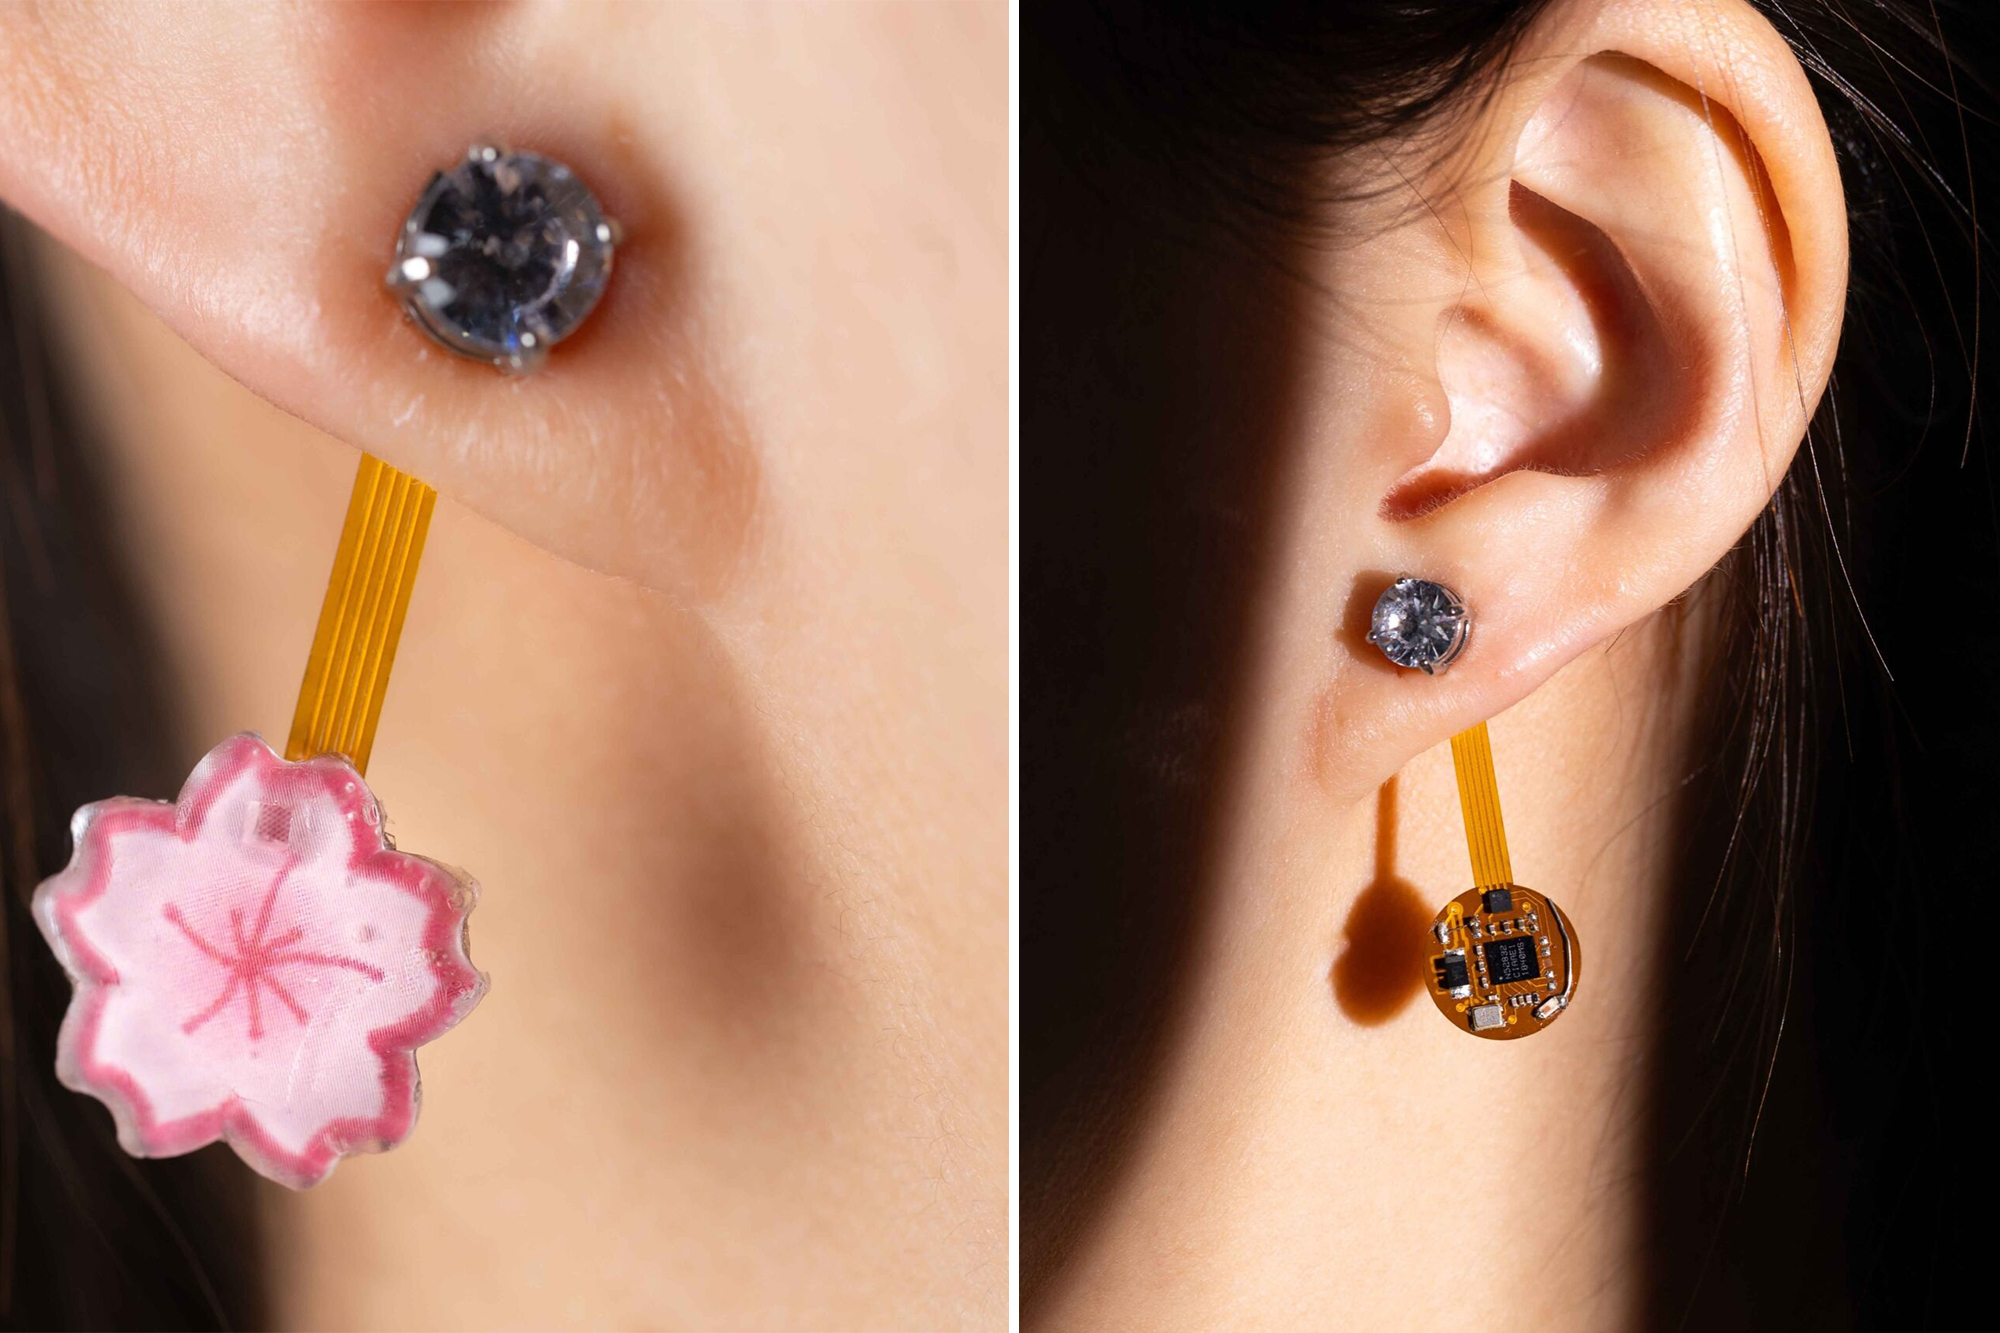 Researchers from the University of Washington created thermal earrings that measure skin temperature.